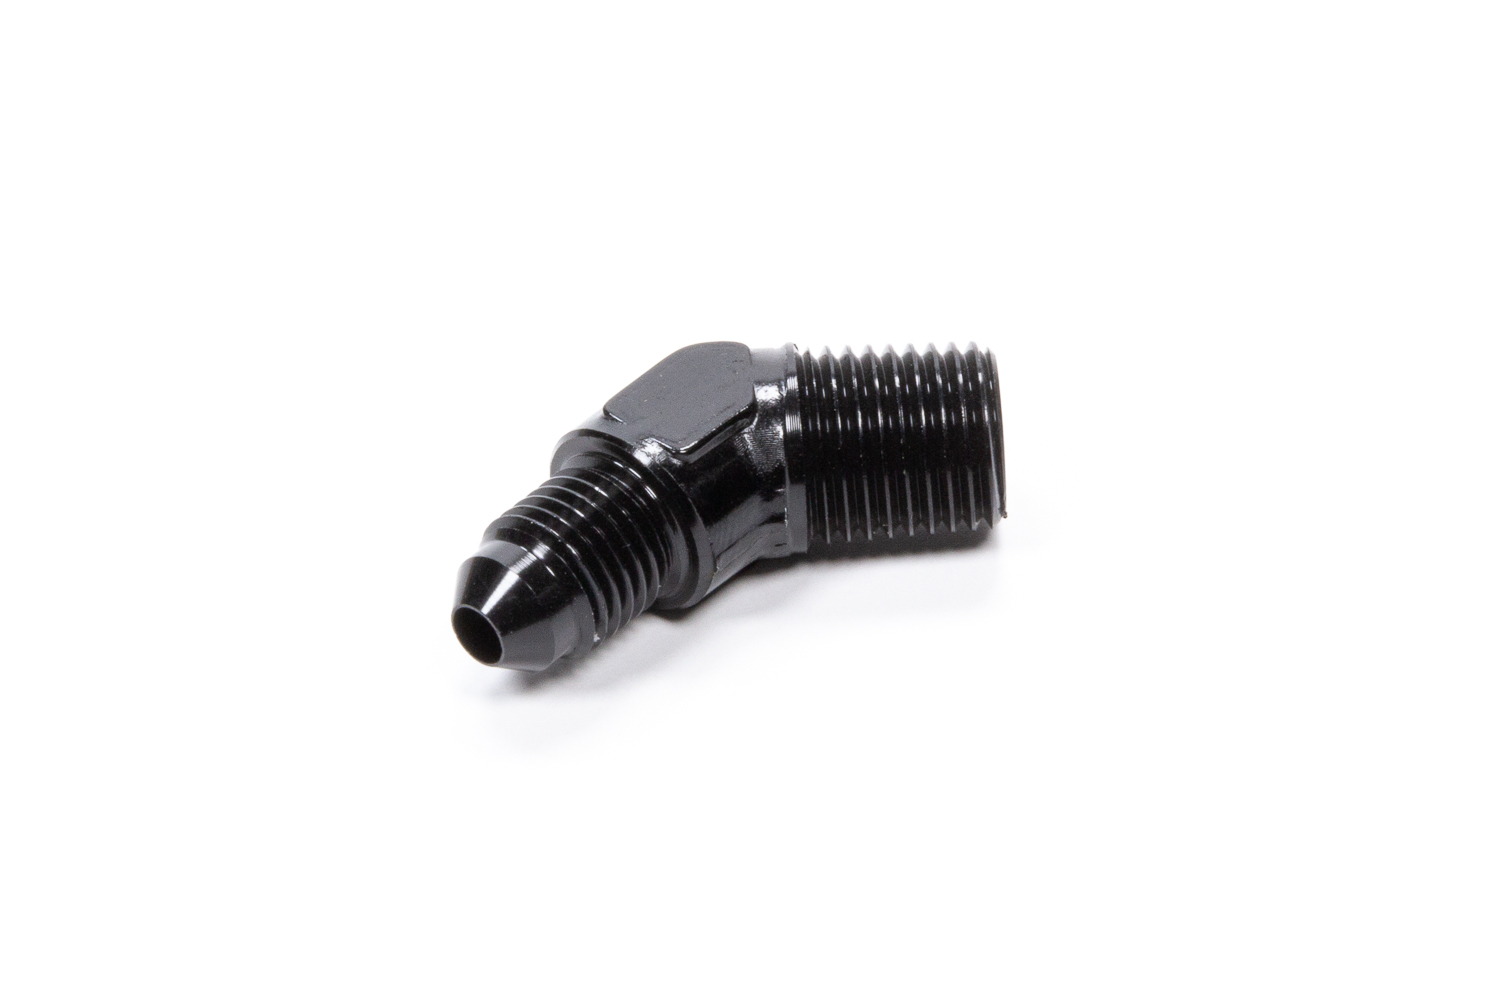 Fragola 482344-BL Fitting, Adapter, 45 Degree, 4 AN Male to 1/4 in NPT Male, Aluminum, Black Anodized, Each